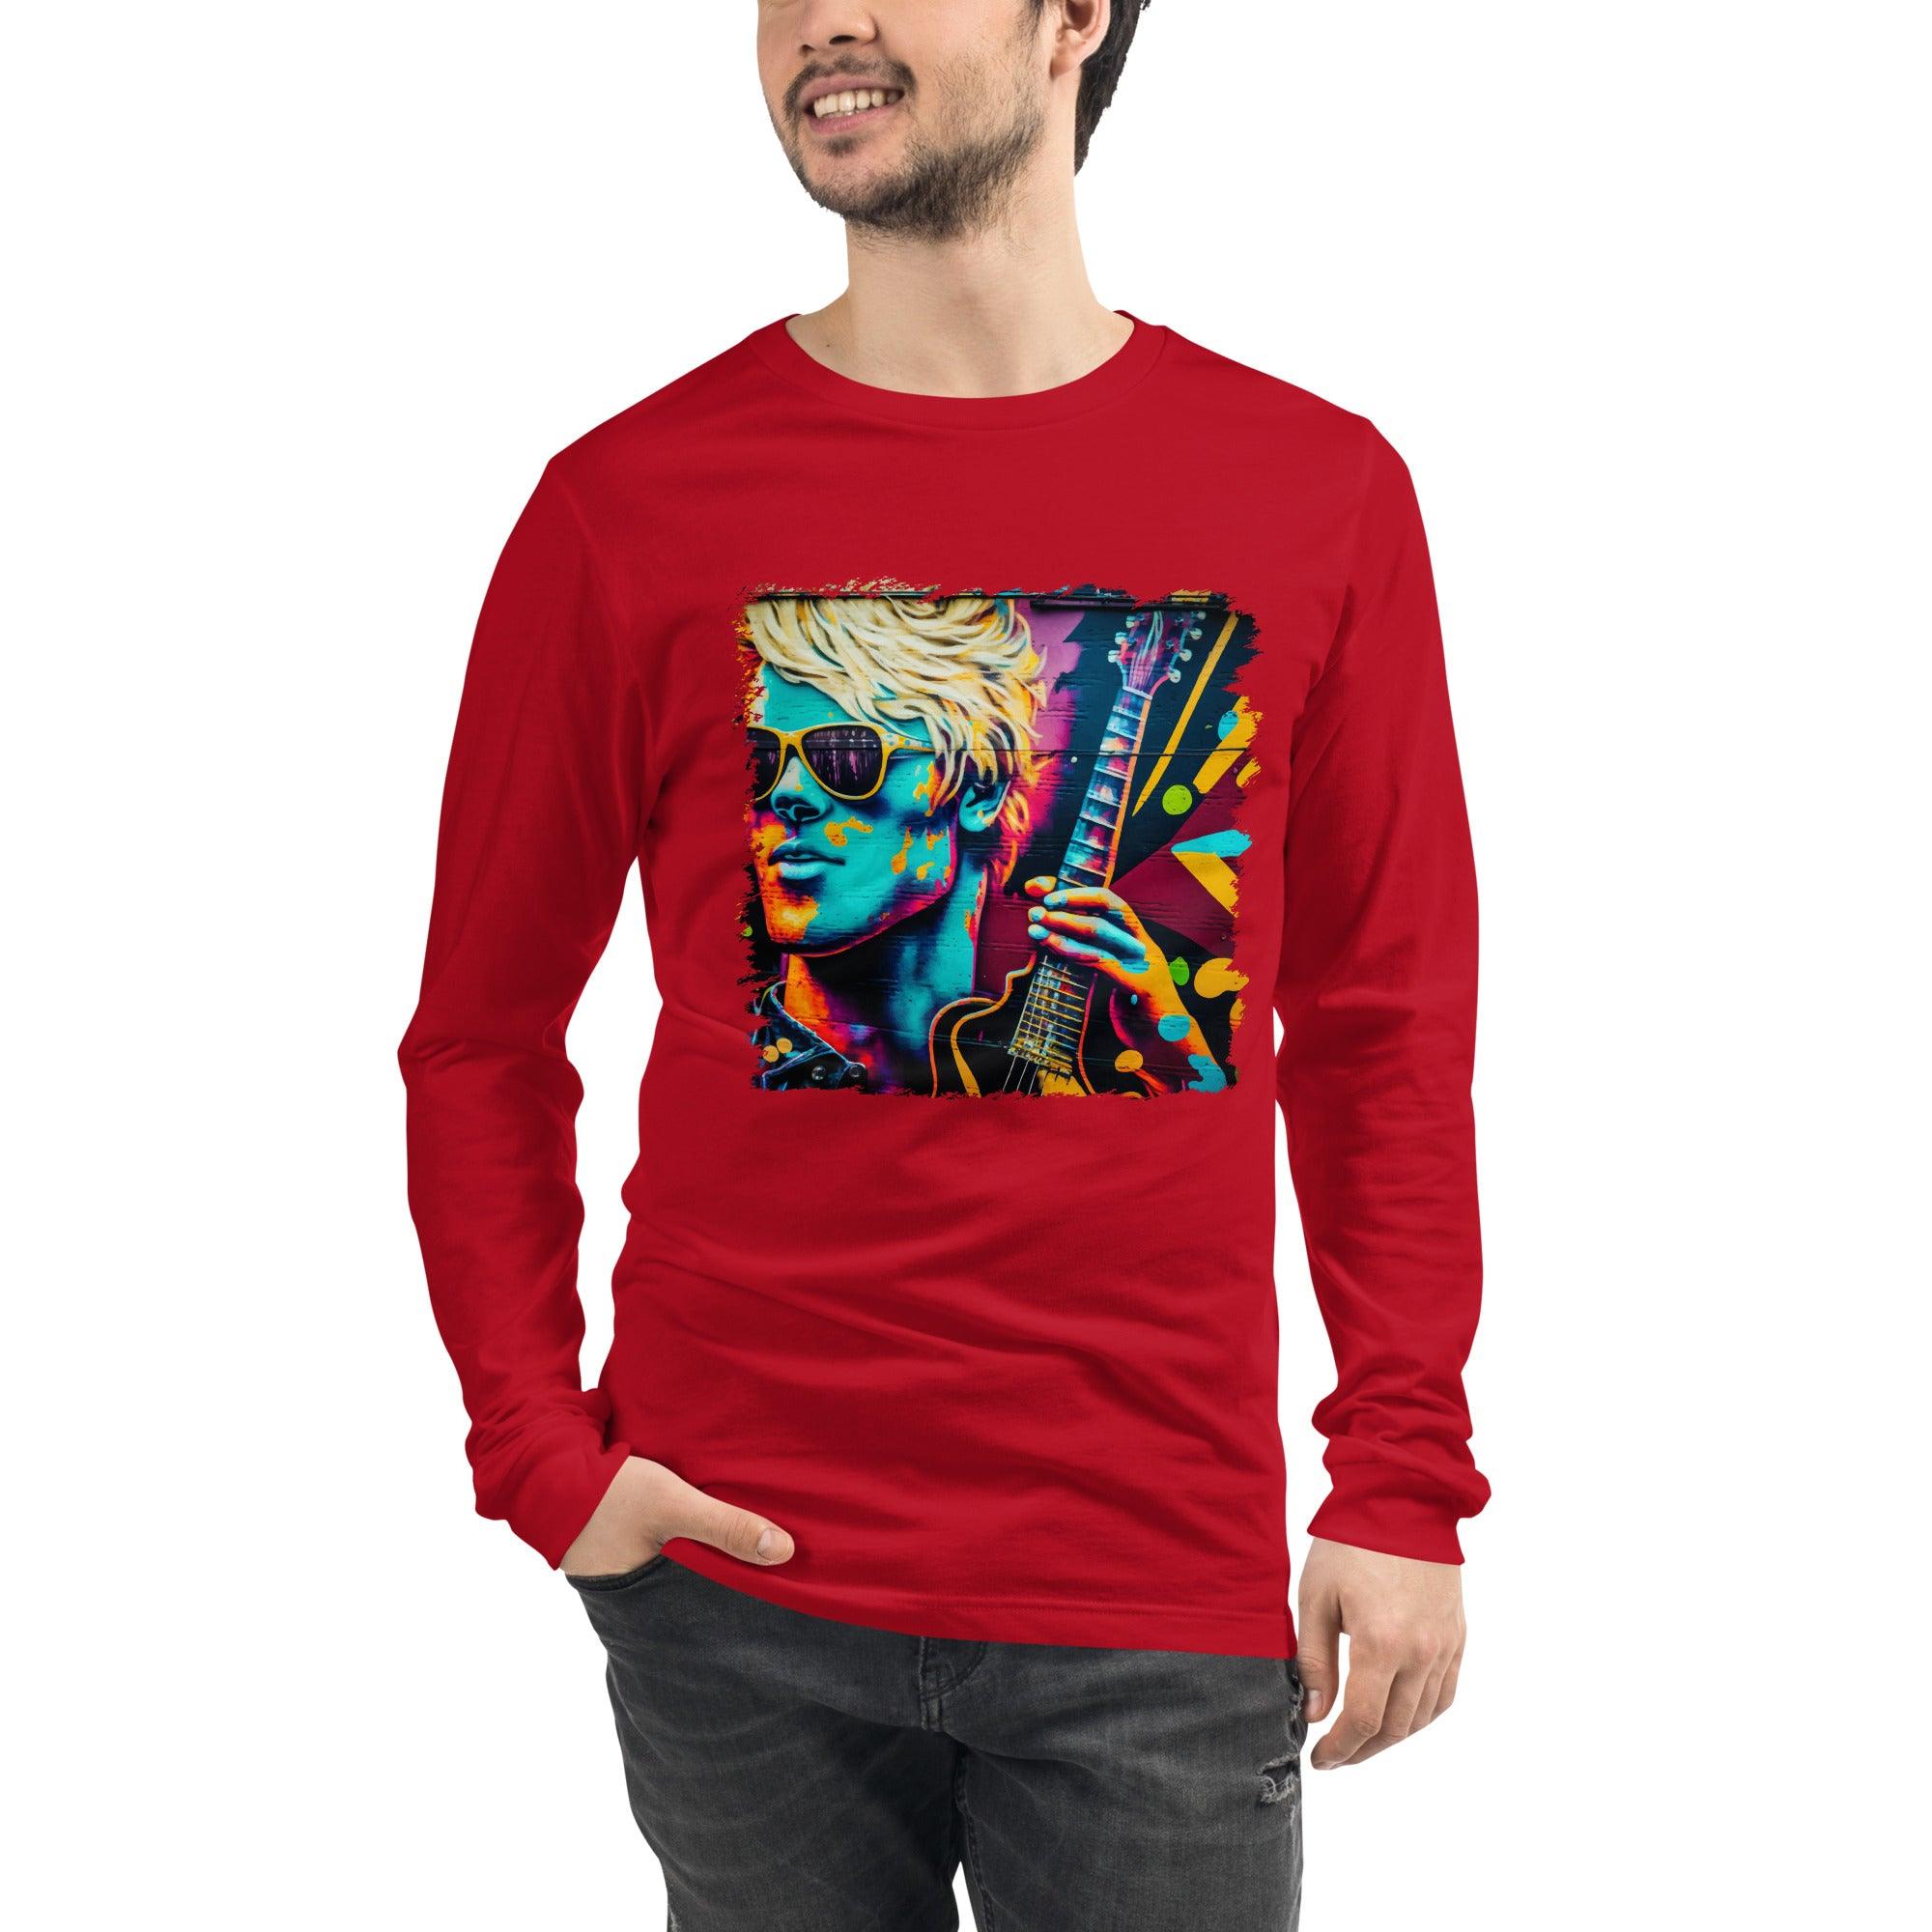 Making Music Come Alive Unisex Long Sleeve Tee - Beyond T-shirts